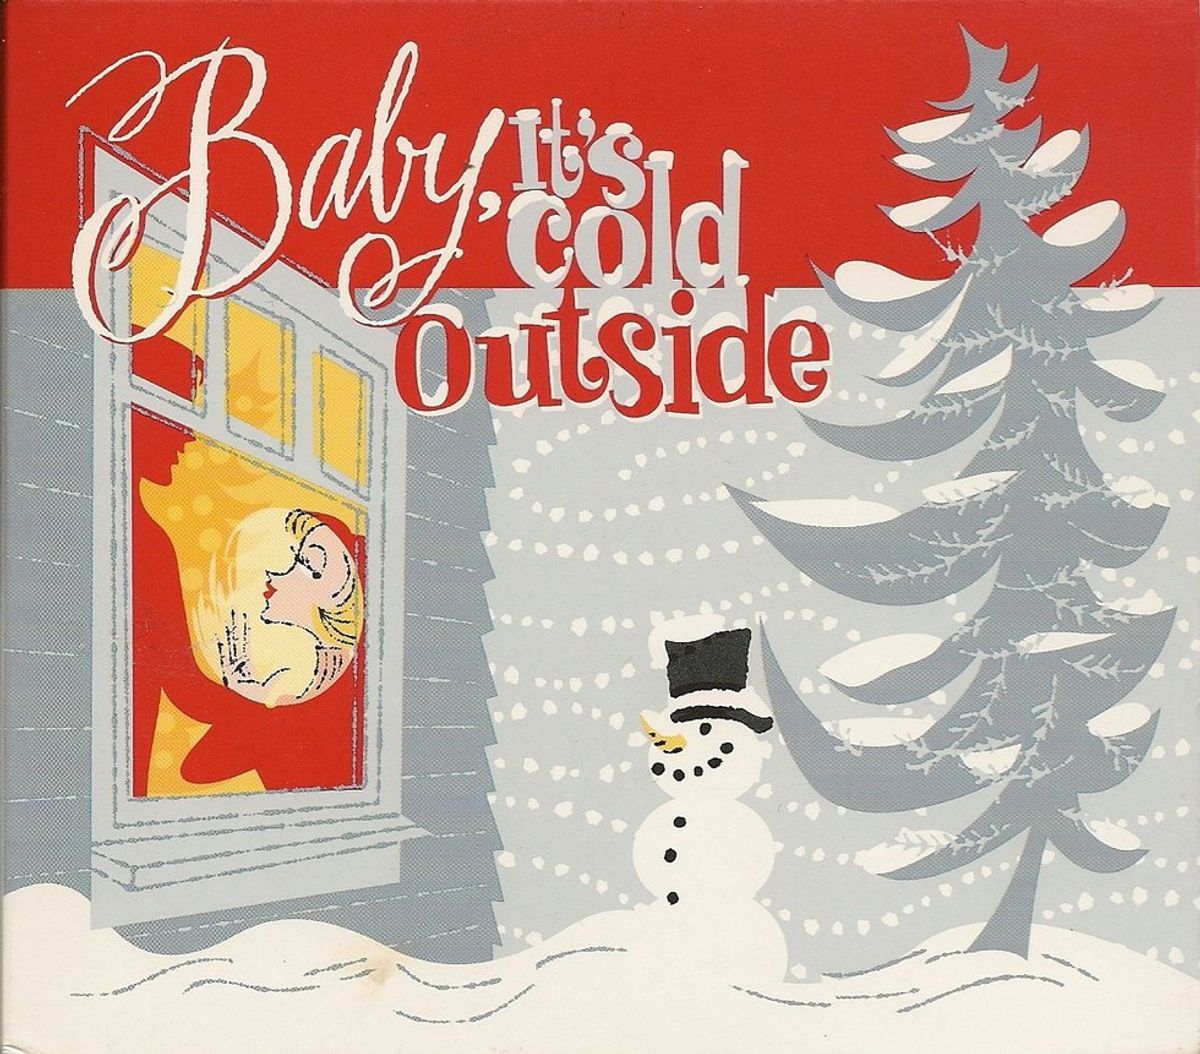 A Feminist's Defense Of Baby It's Cold Outside